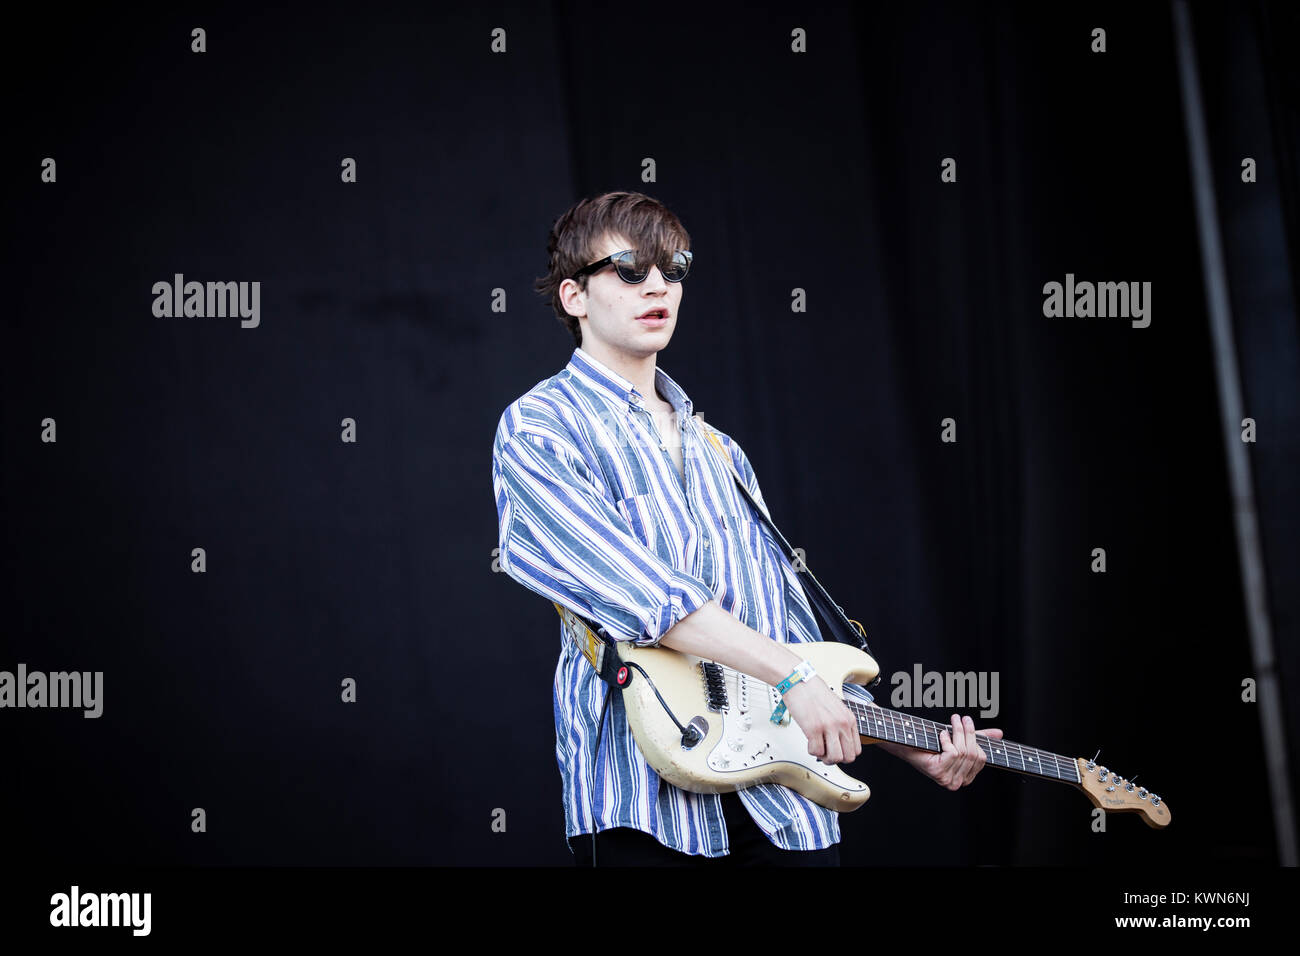 The English rock band Childhood performs a live concert at the Spanish music festival Primavera Sound 2015 in Barcelona. Here guitarist Leo Dobsen is pictured live on stage. Spain 28/05 2015. Stock Photo